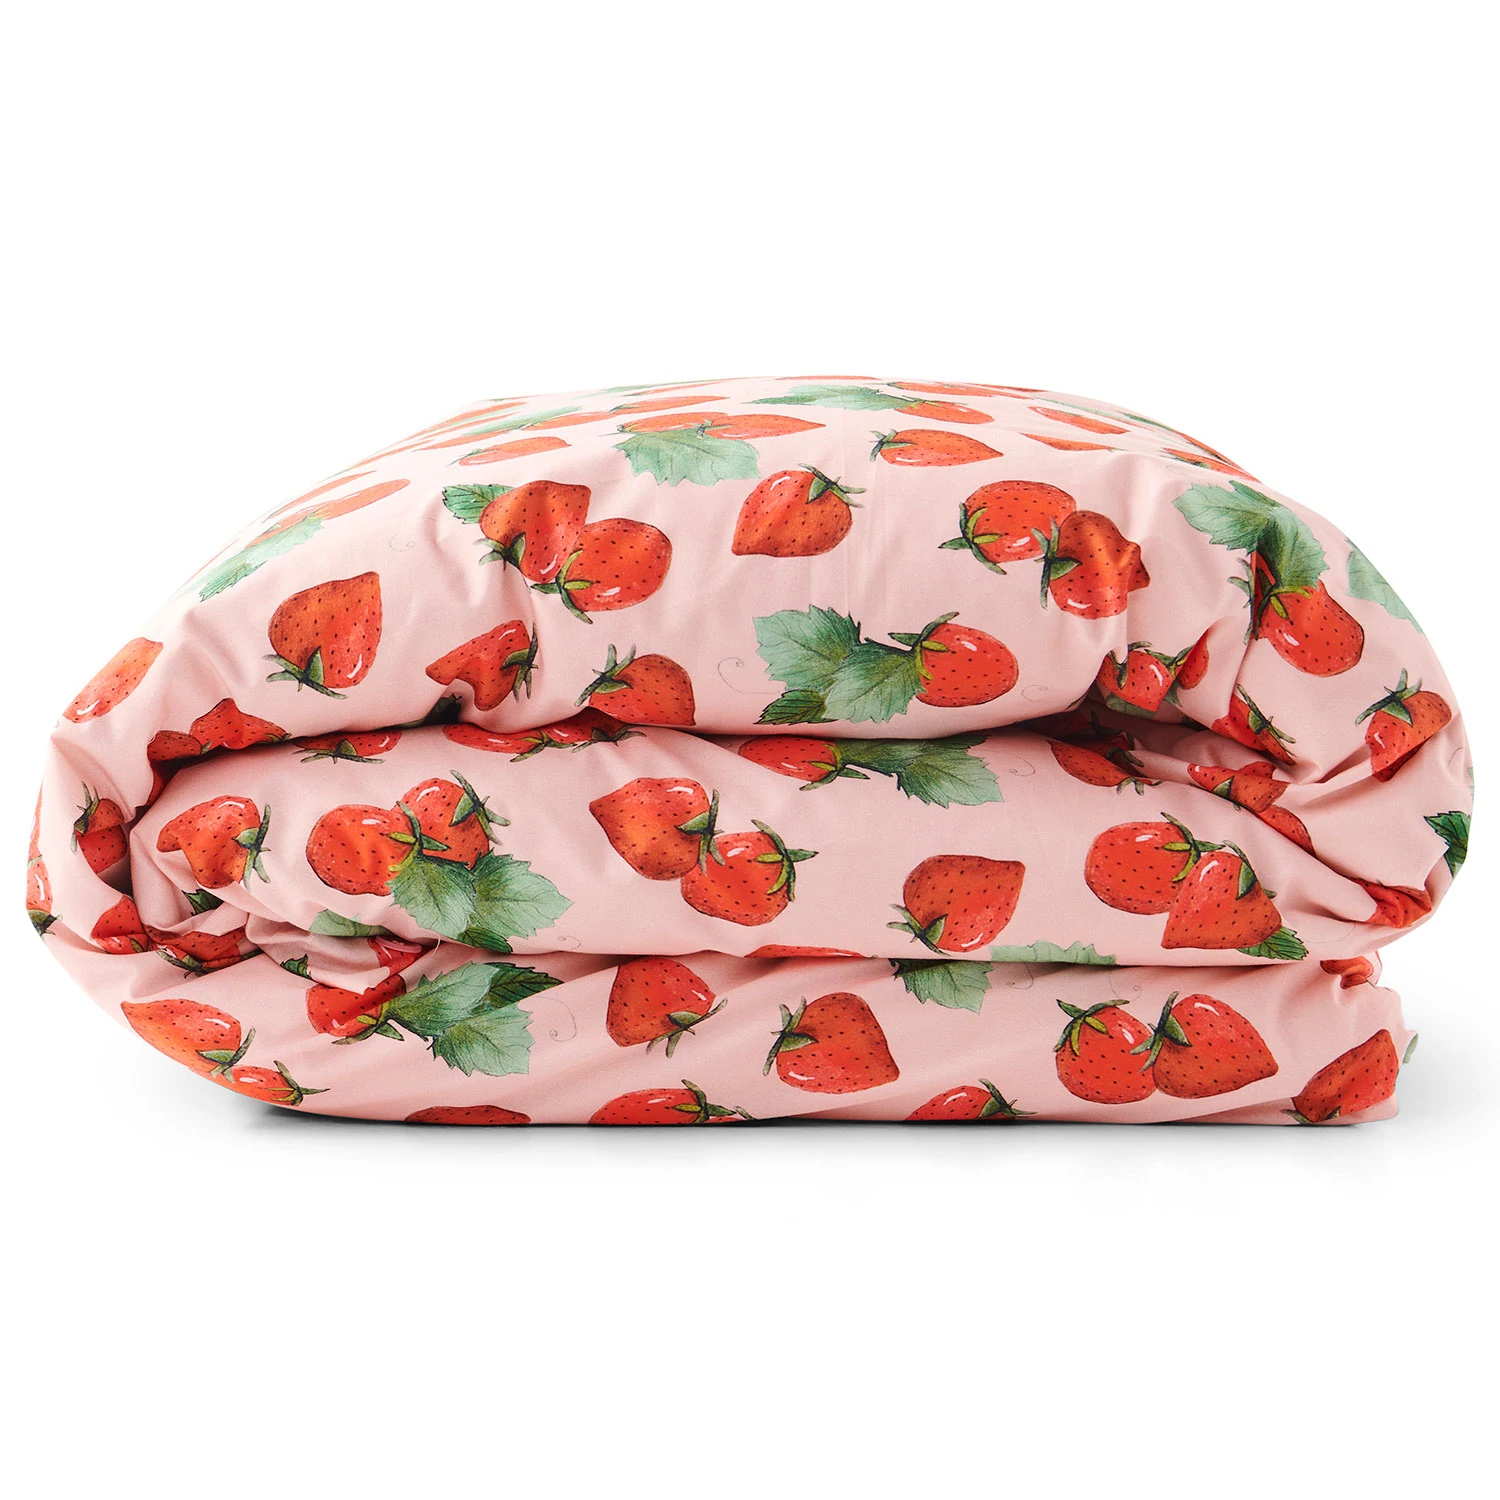 Quilt Cover - Strawberry Delight